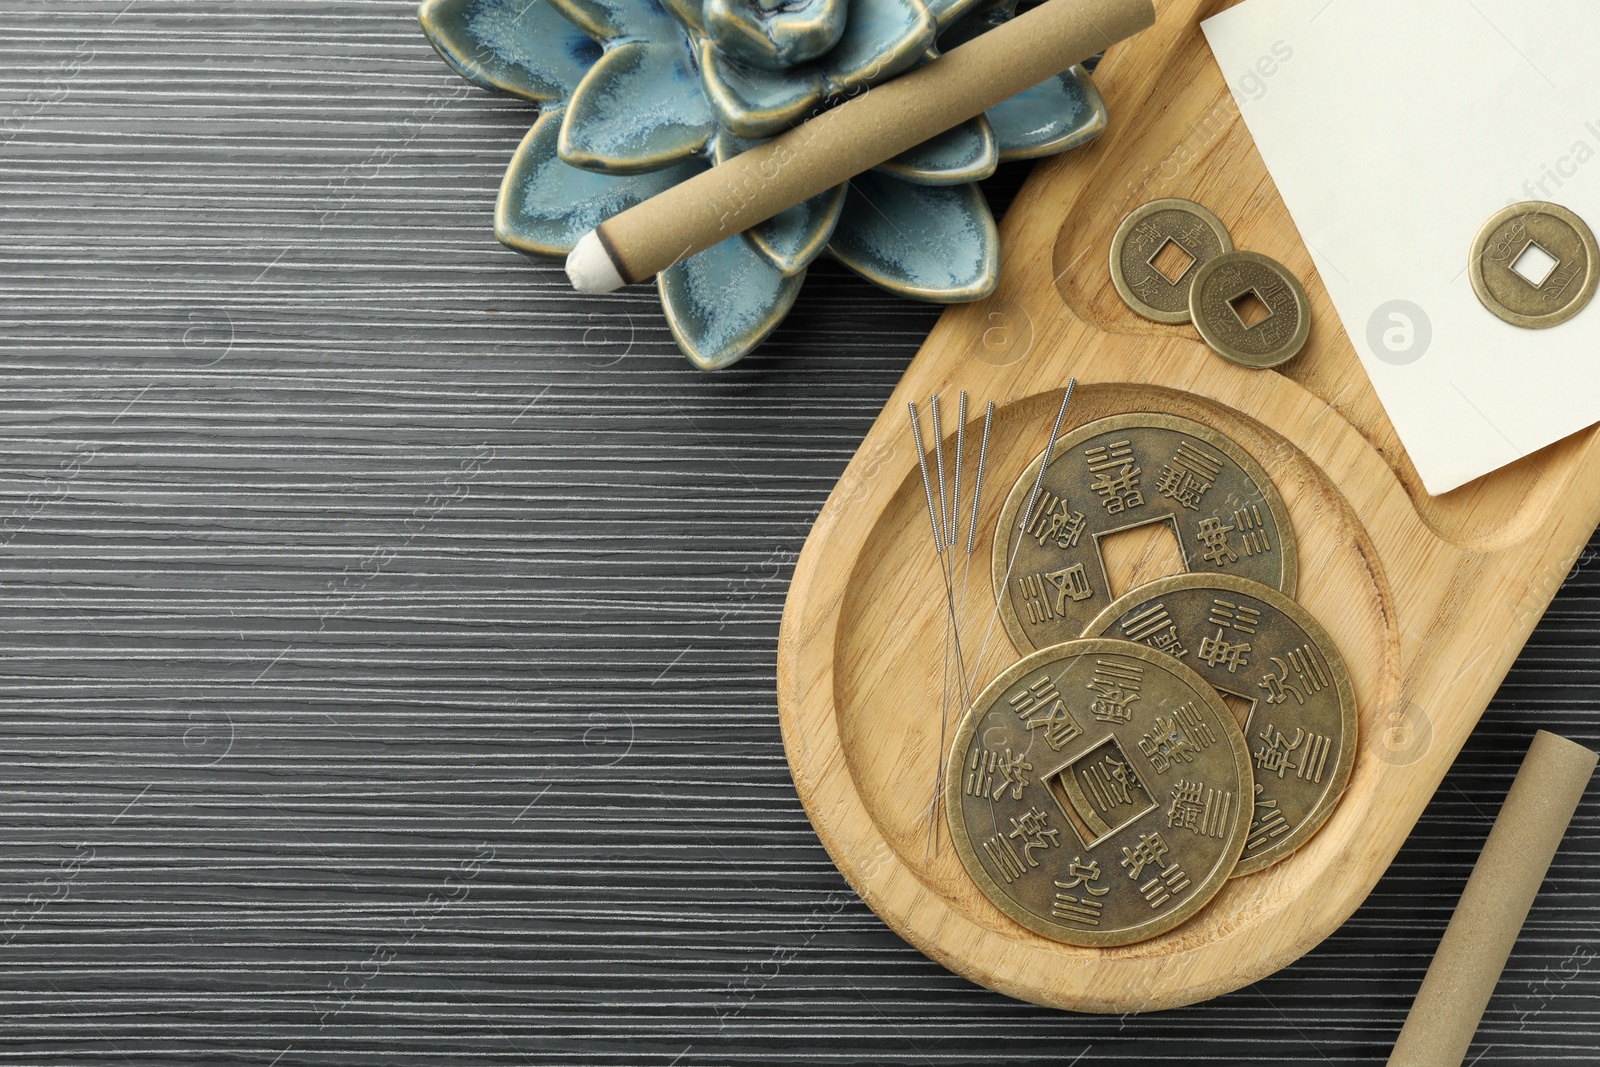 Photo of Acupuncture needles, moxa sticks and antique Chinese coins on wooden table, flat lay. Space for text